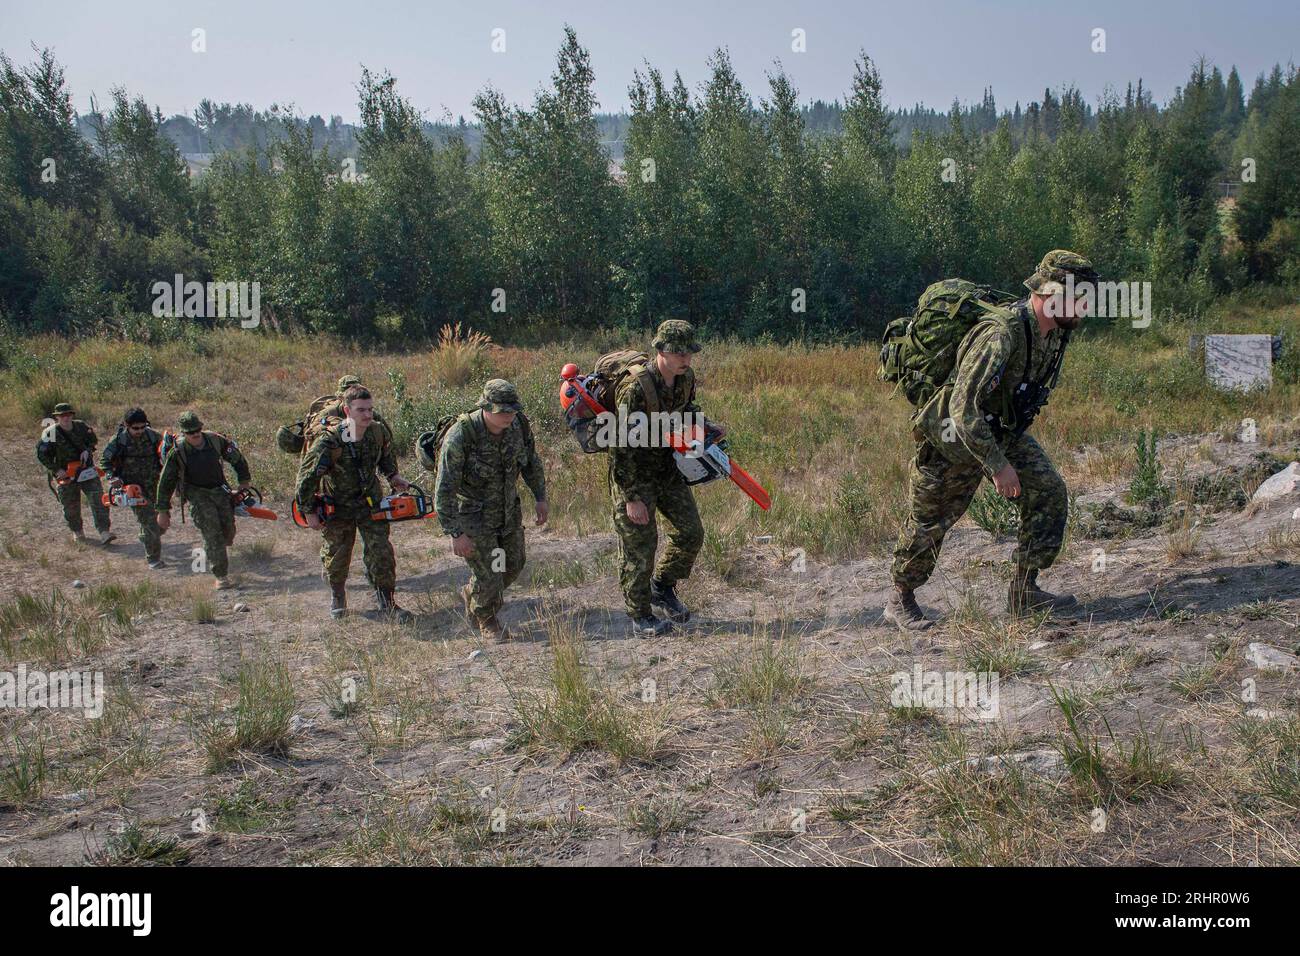 (230818) -- NORTHWEST TERRITORIES (CANADA), Aug. 18, 2023 (Xinhua) -- Photo taken on Aug. 16, 2023 shows members of the Canadian Armed Forces heading to work on a firebreak in Yellowknife, Northwest Territories, Canada. The government of Canada's Northwest Territories declared a state of emergency on Tuesday and issued the evacuation order on Wednesday in response to out-of-control wildfires. Mass evacuation of areas in the territory is ongoing, including the capital city of Yellowknife, the territory's largest community with a population of more than 20,000. Residents were ordered to leave by Stock Photo